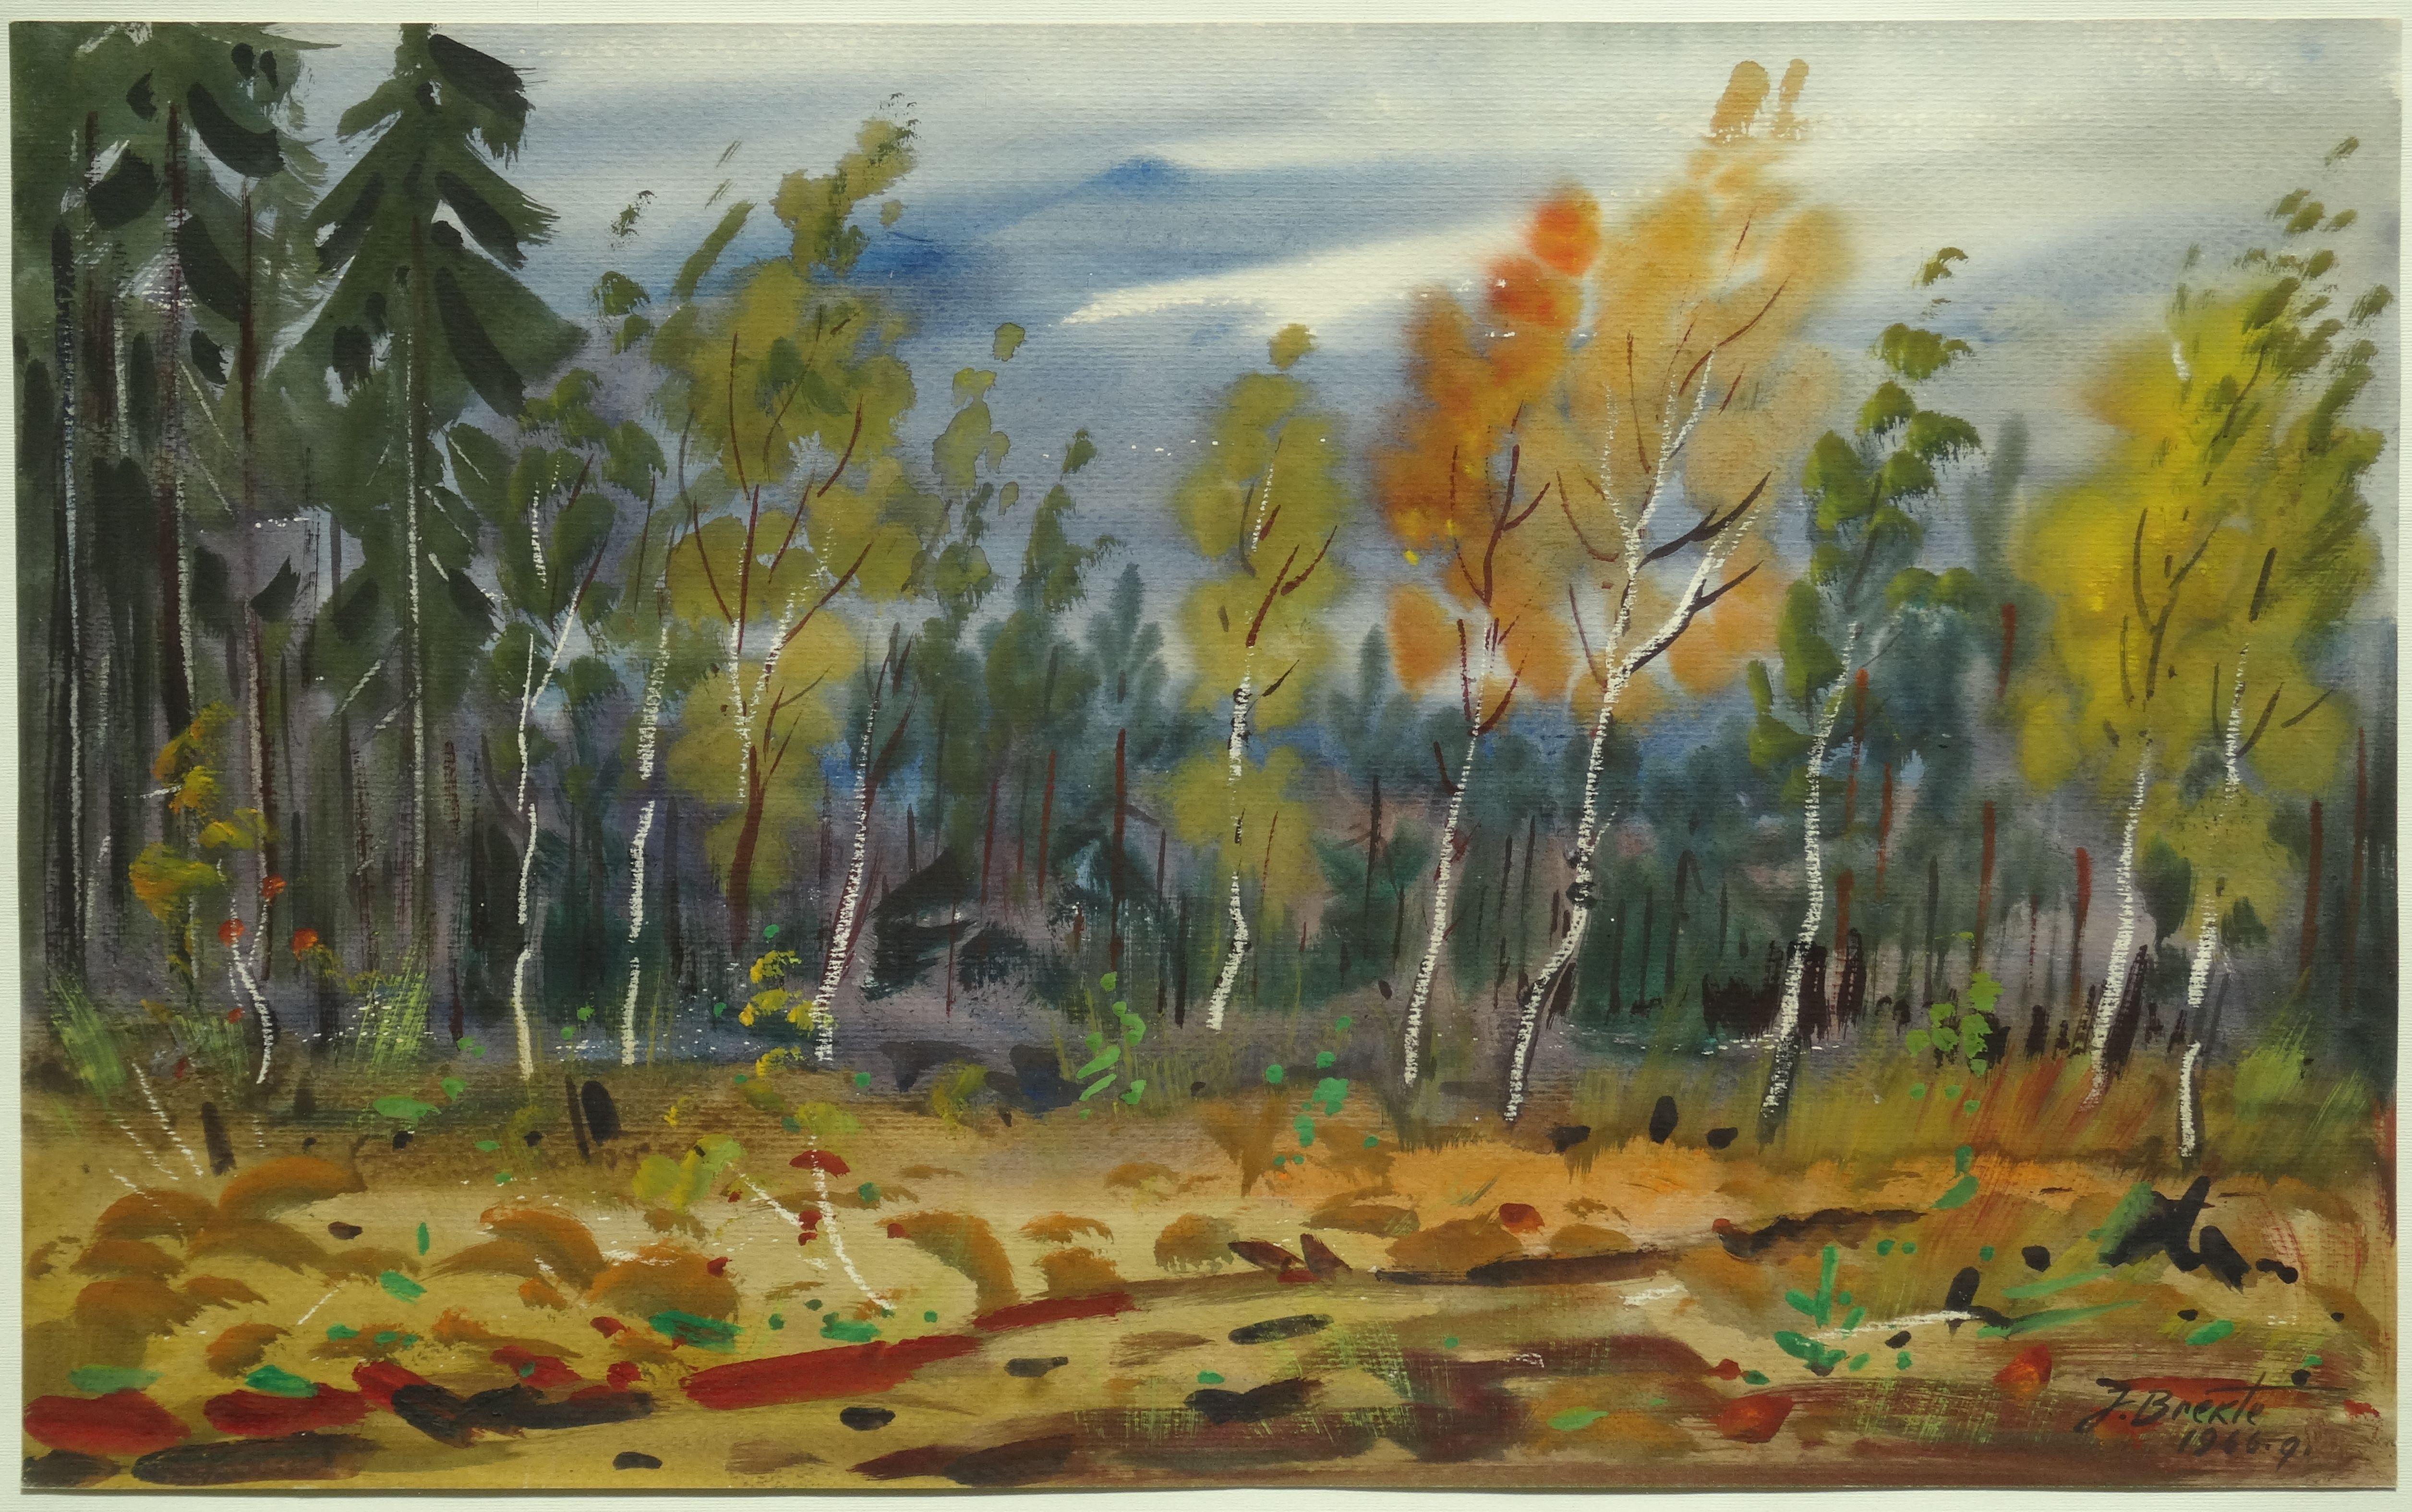 Autumn landscape. 1966. Watercolor on paper. 33, 5 x 54 cm - Realist Painting by Janis Brekte